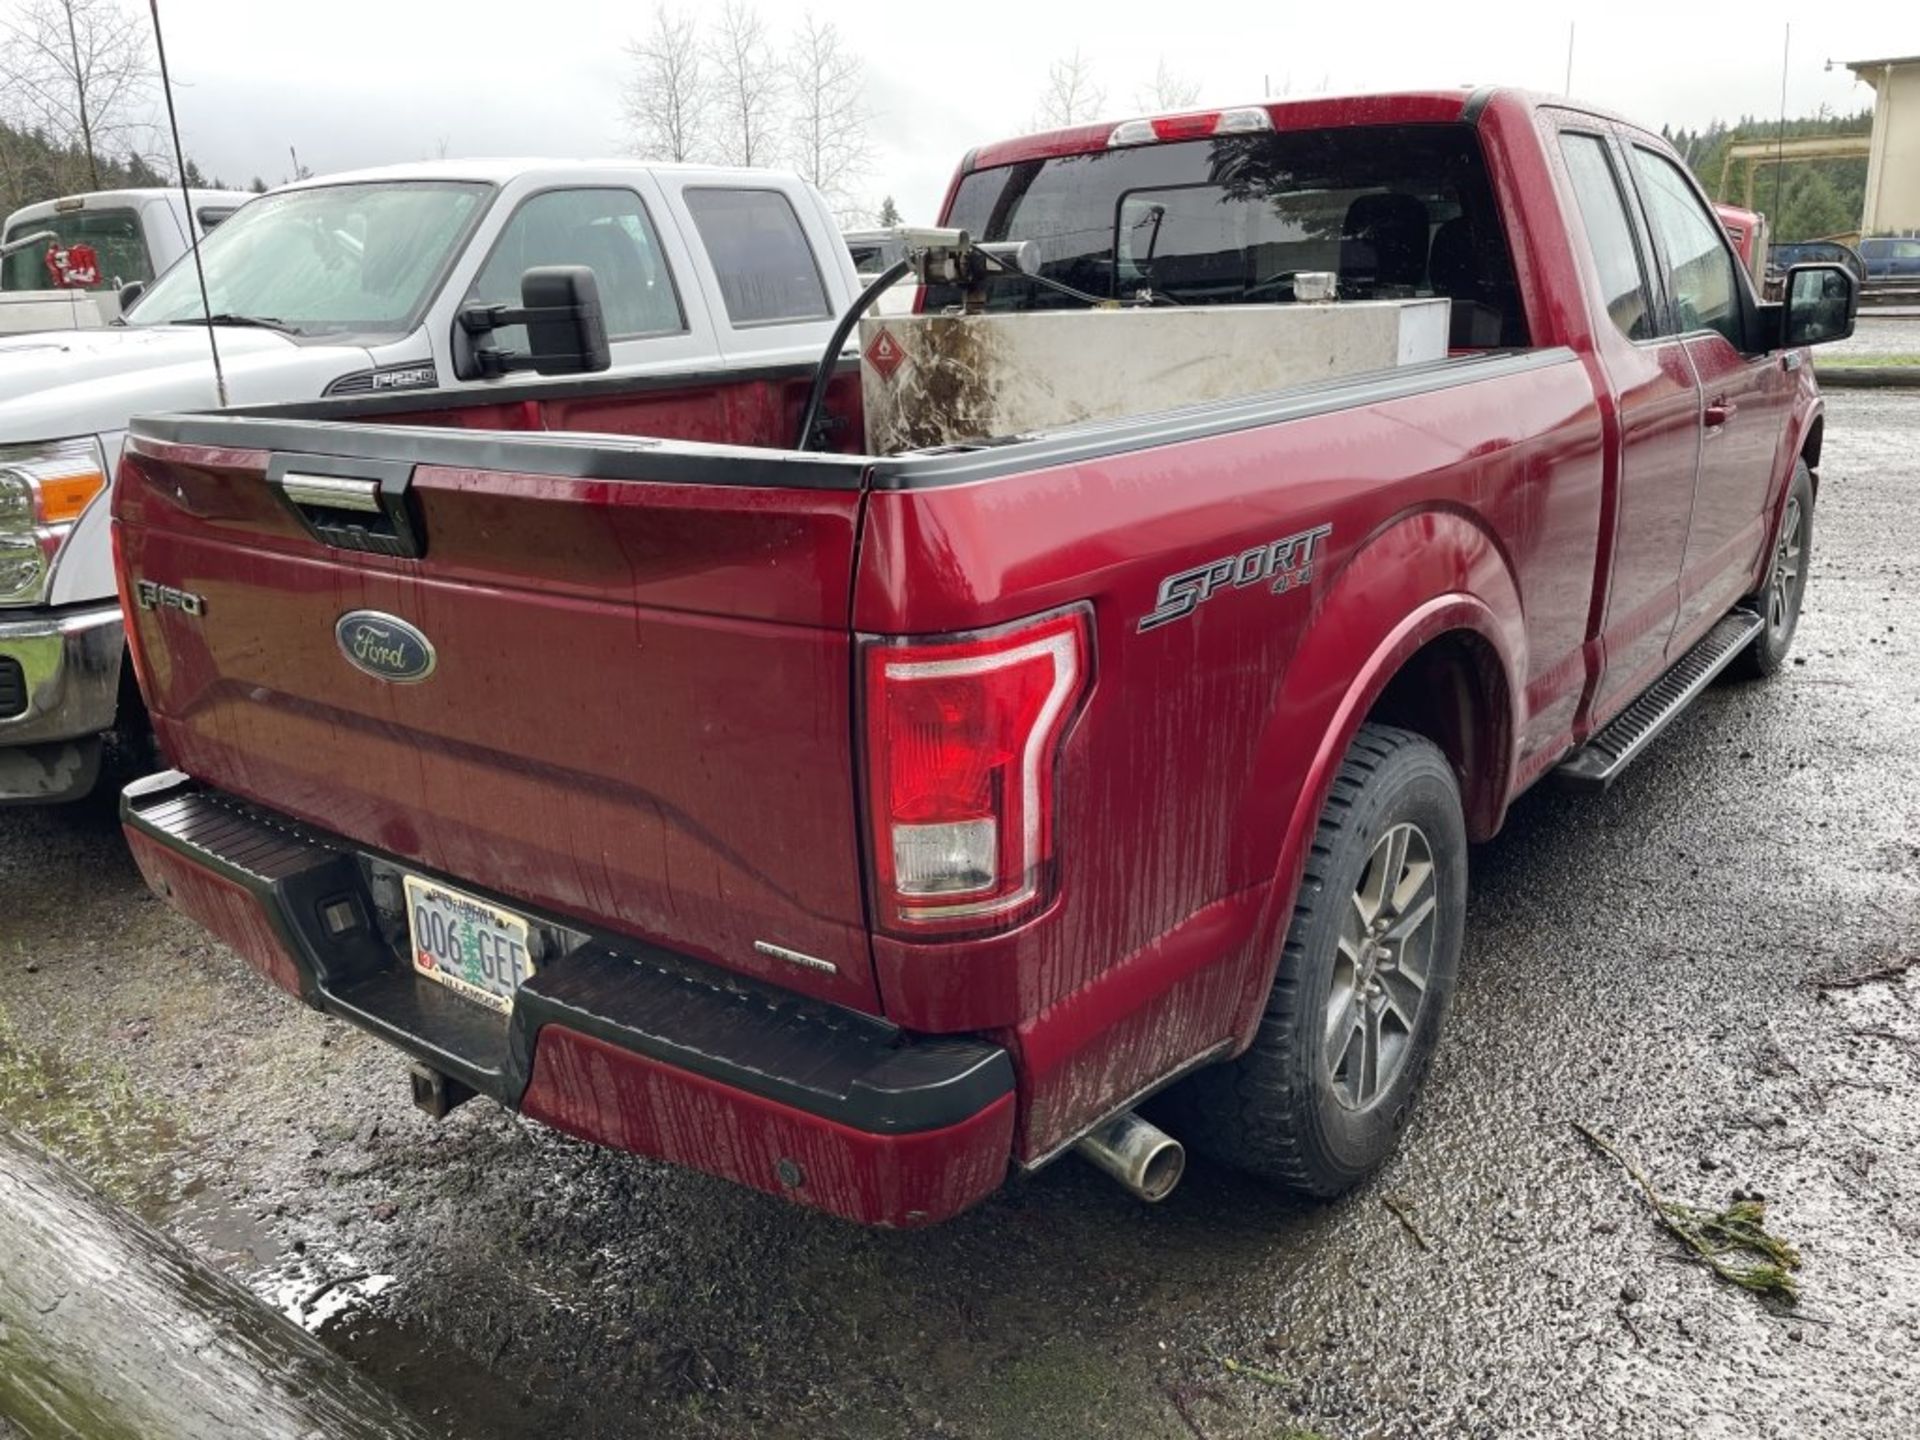 2016 Ford F150 XLT 4x4 Extra Cab Pickup - Image 3 of 14